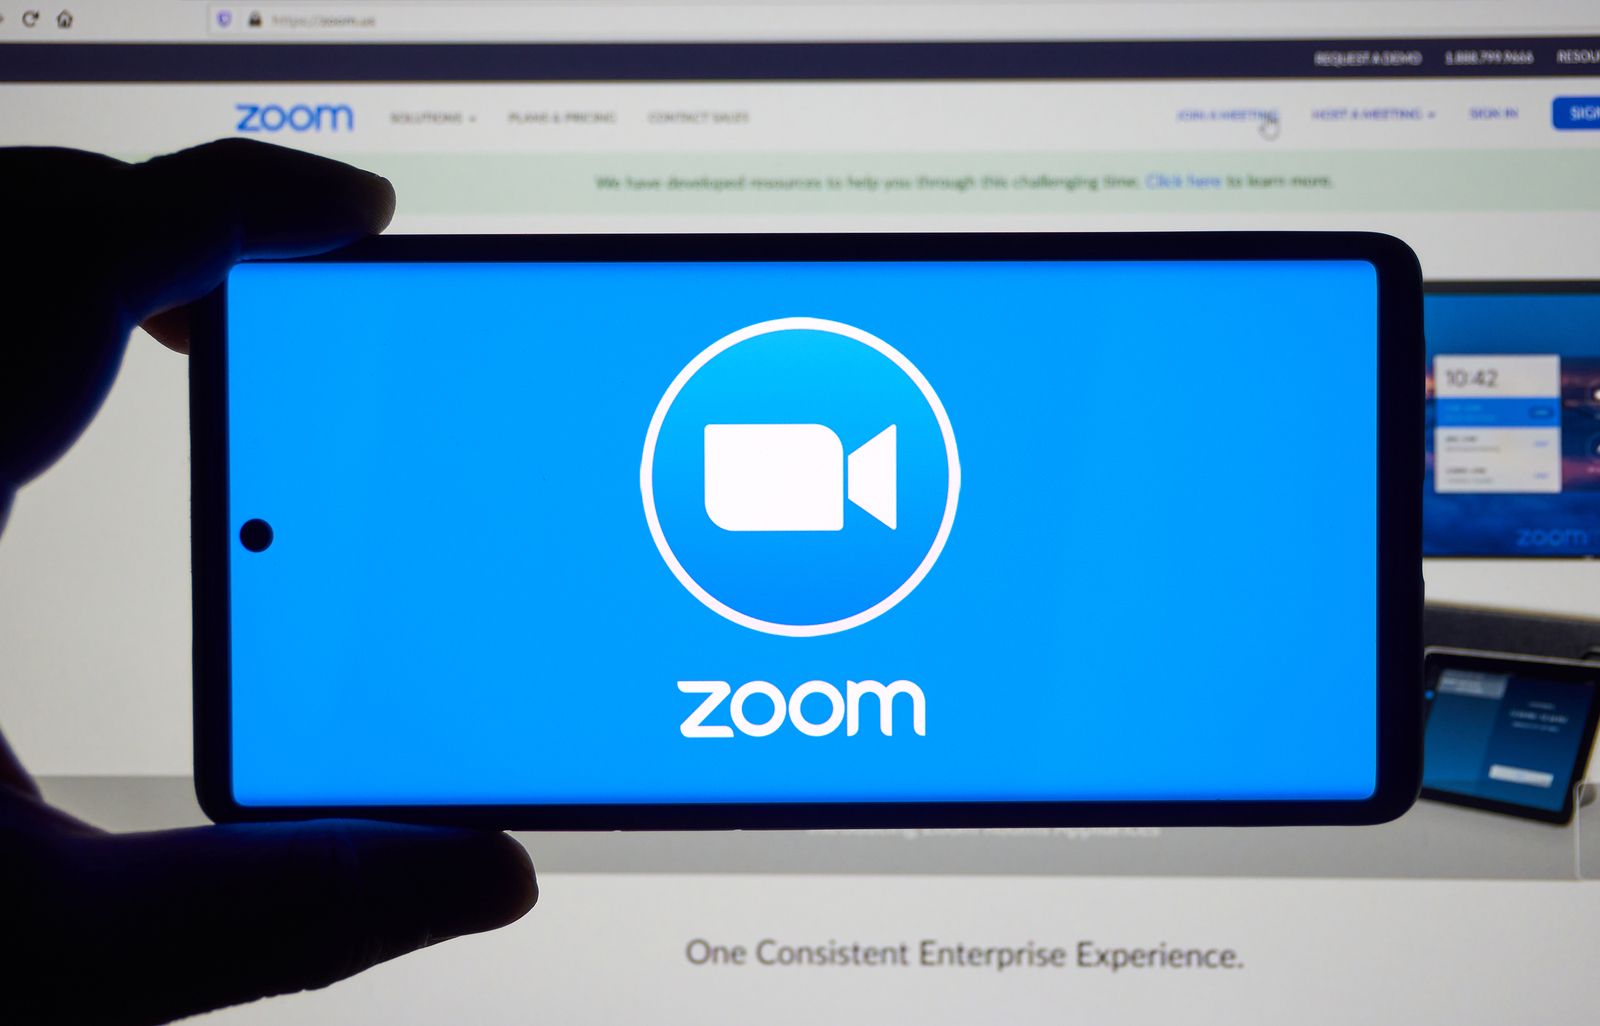 How to create a poll in Zoom?